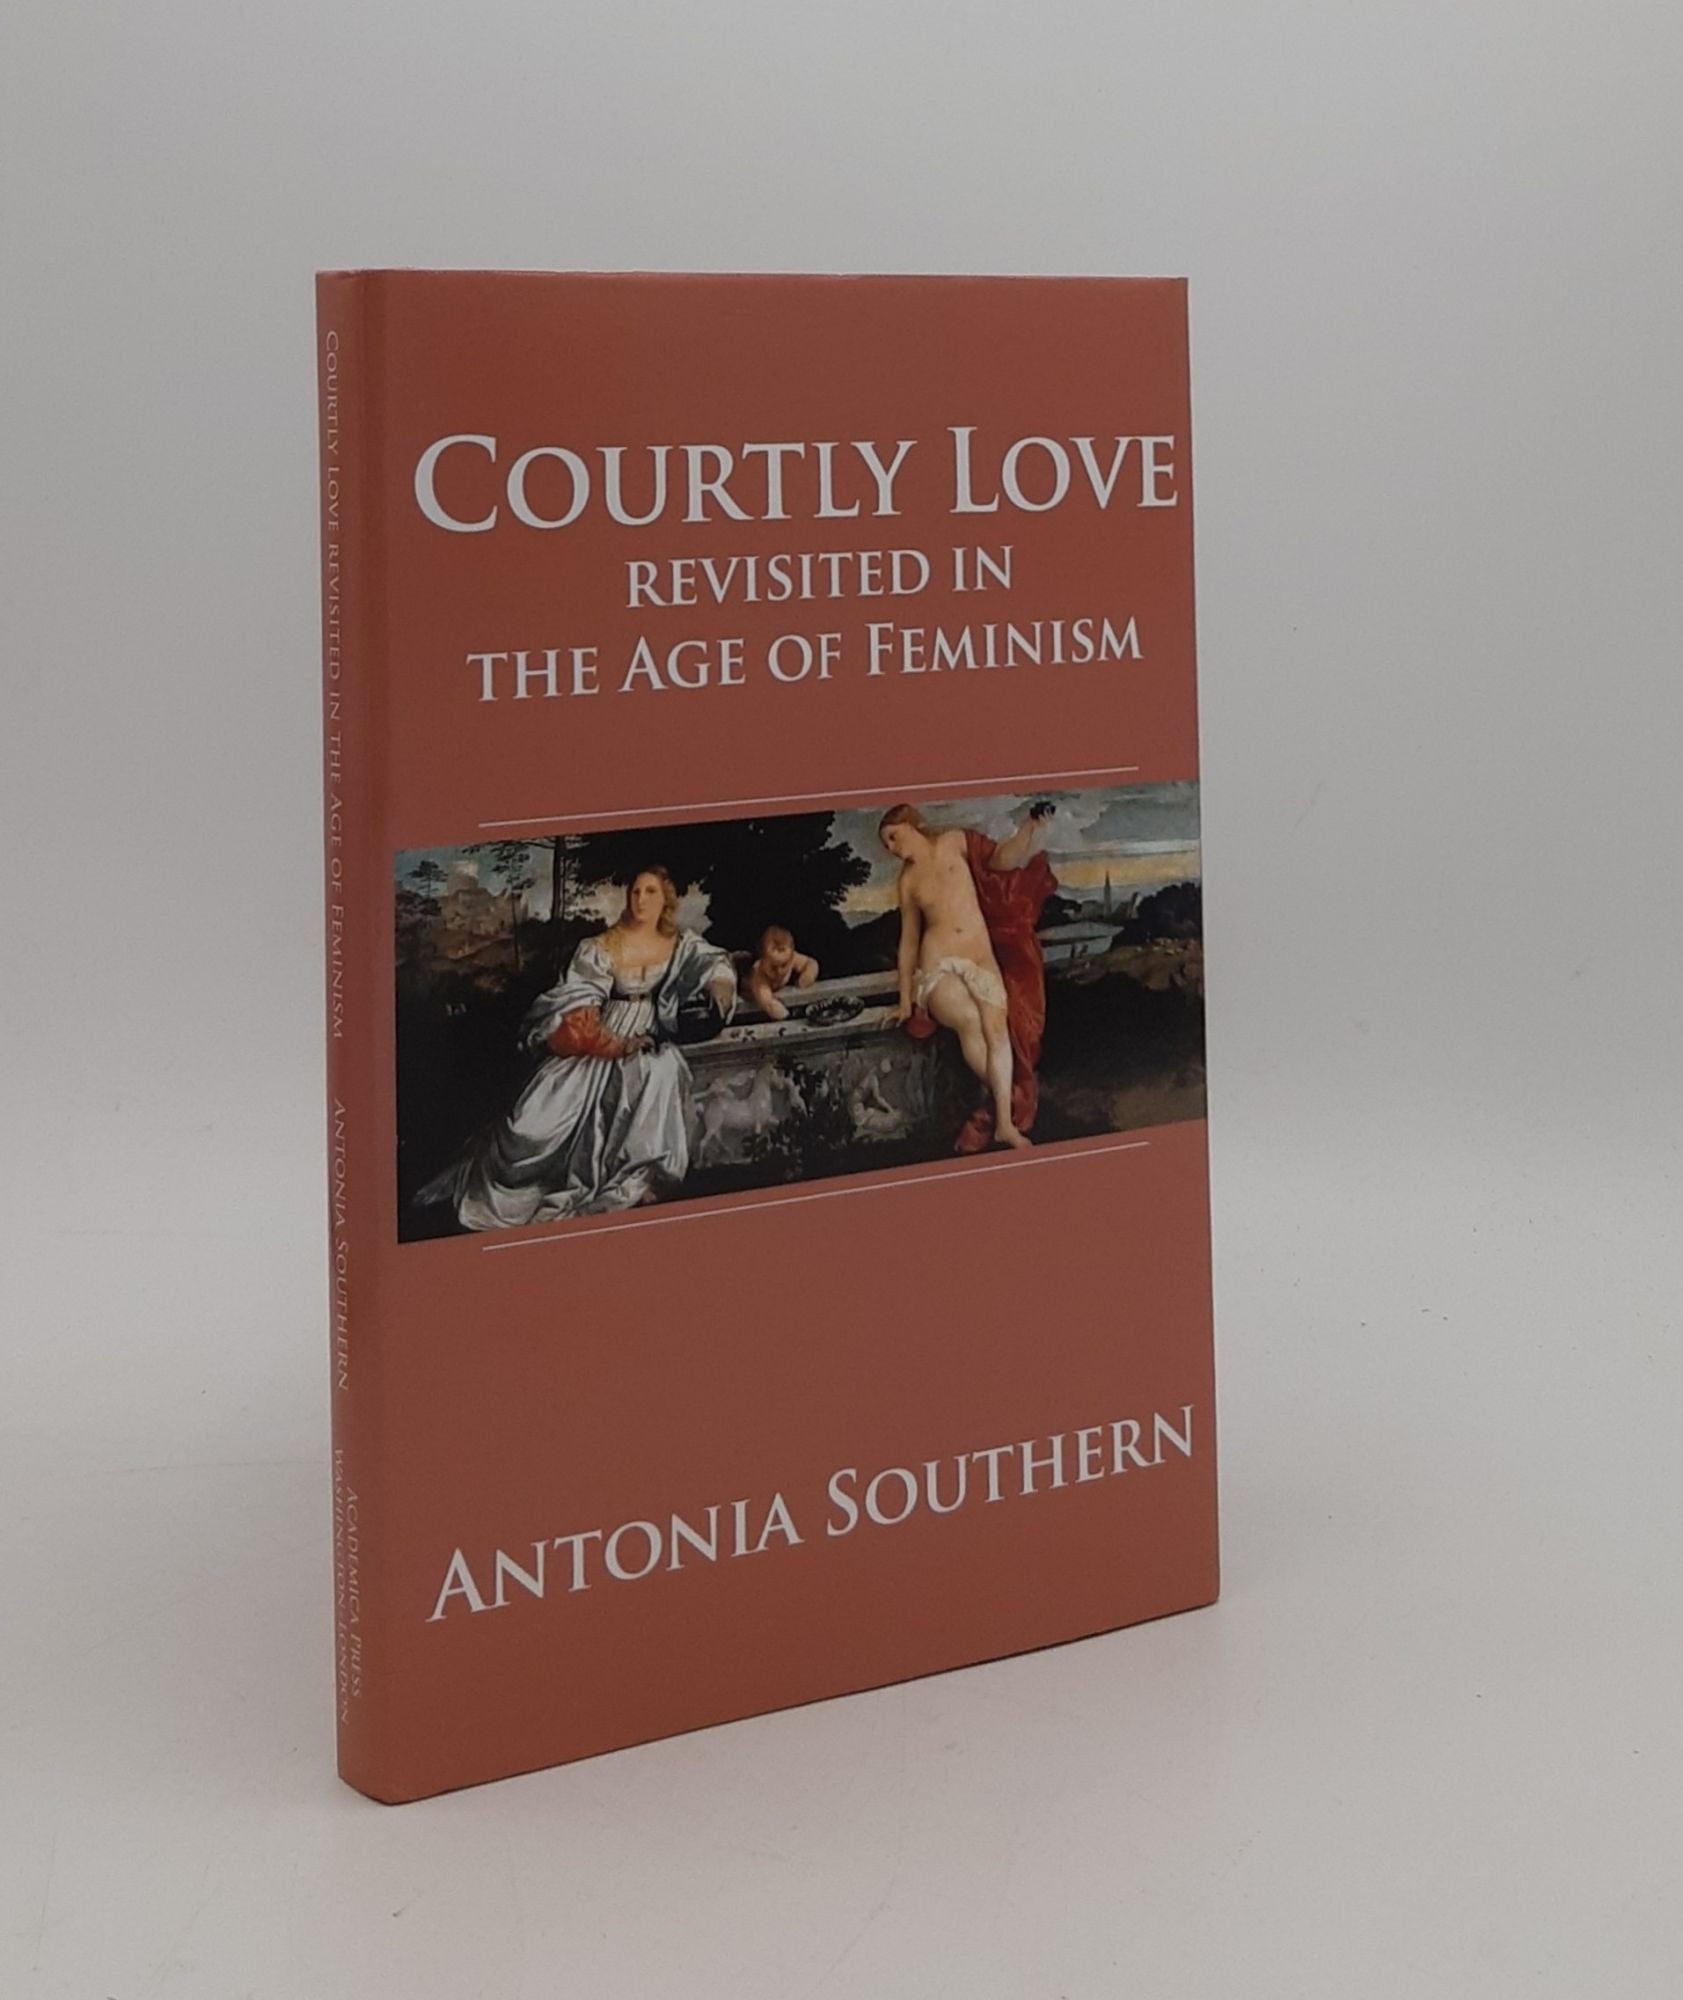 SOUTHERN Antonia - Courtly Love Revisited in the Age of Feminism